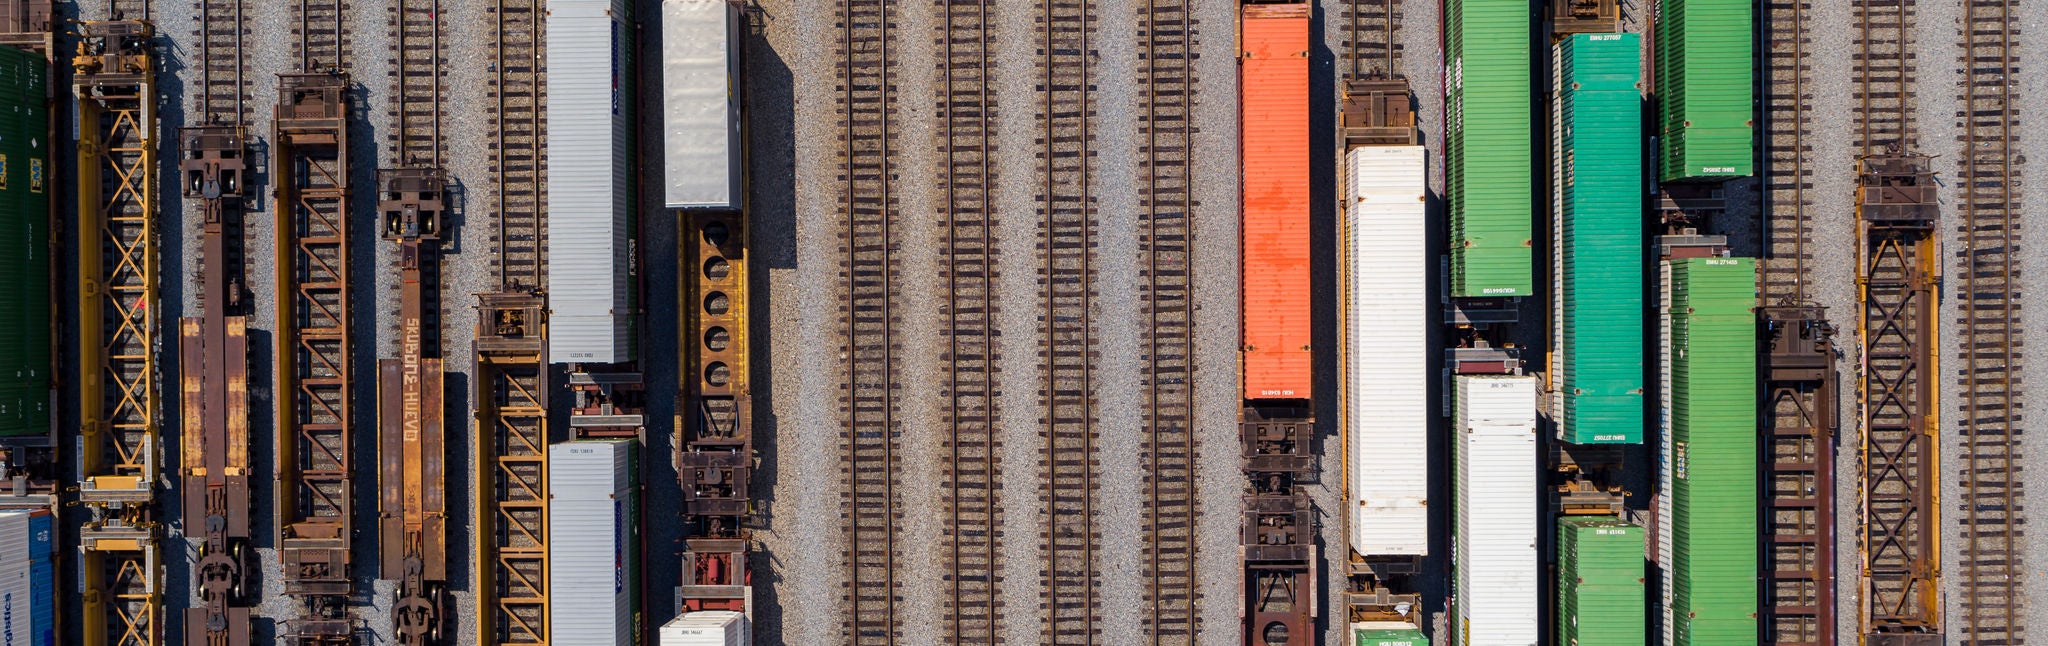 Aerial view of Norfolk Southern trains in a train yard shipping agricultural products or industrial forest products